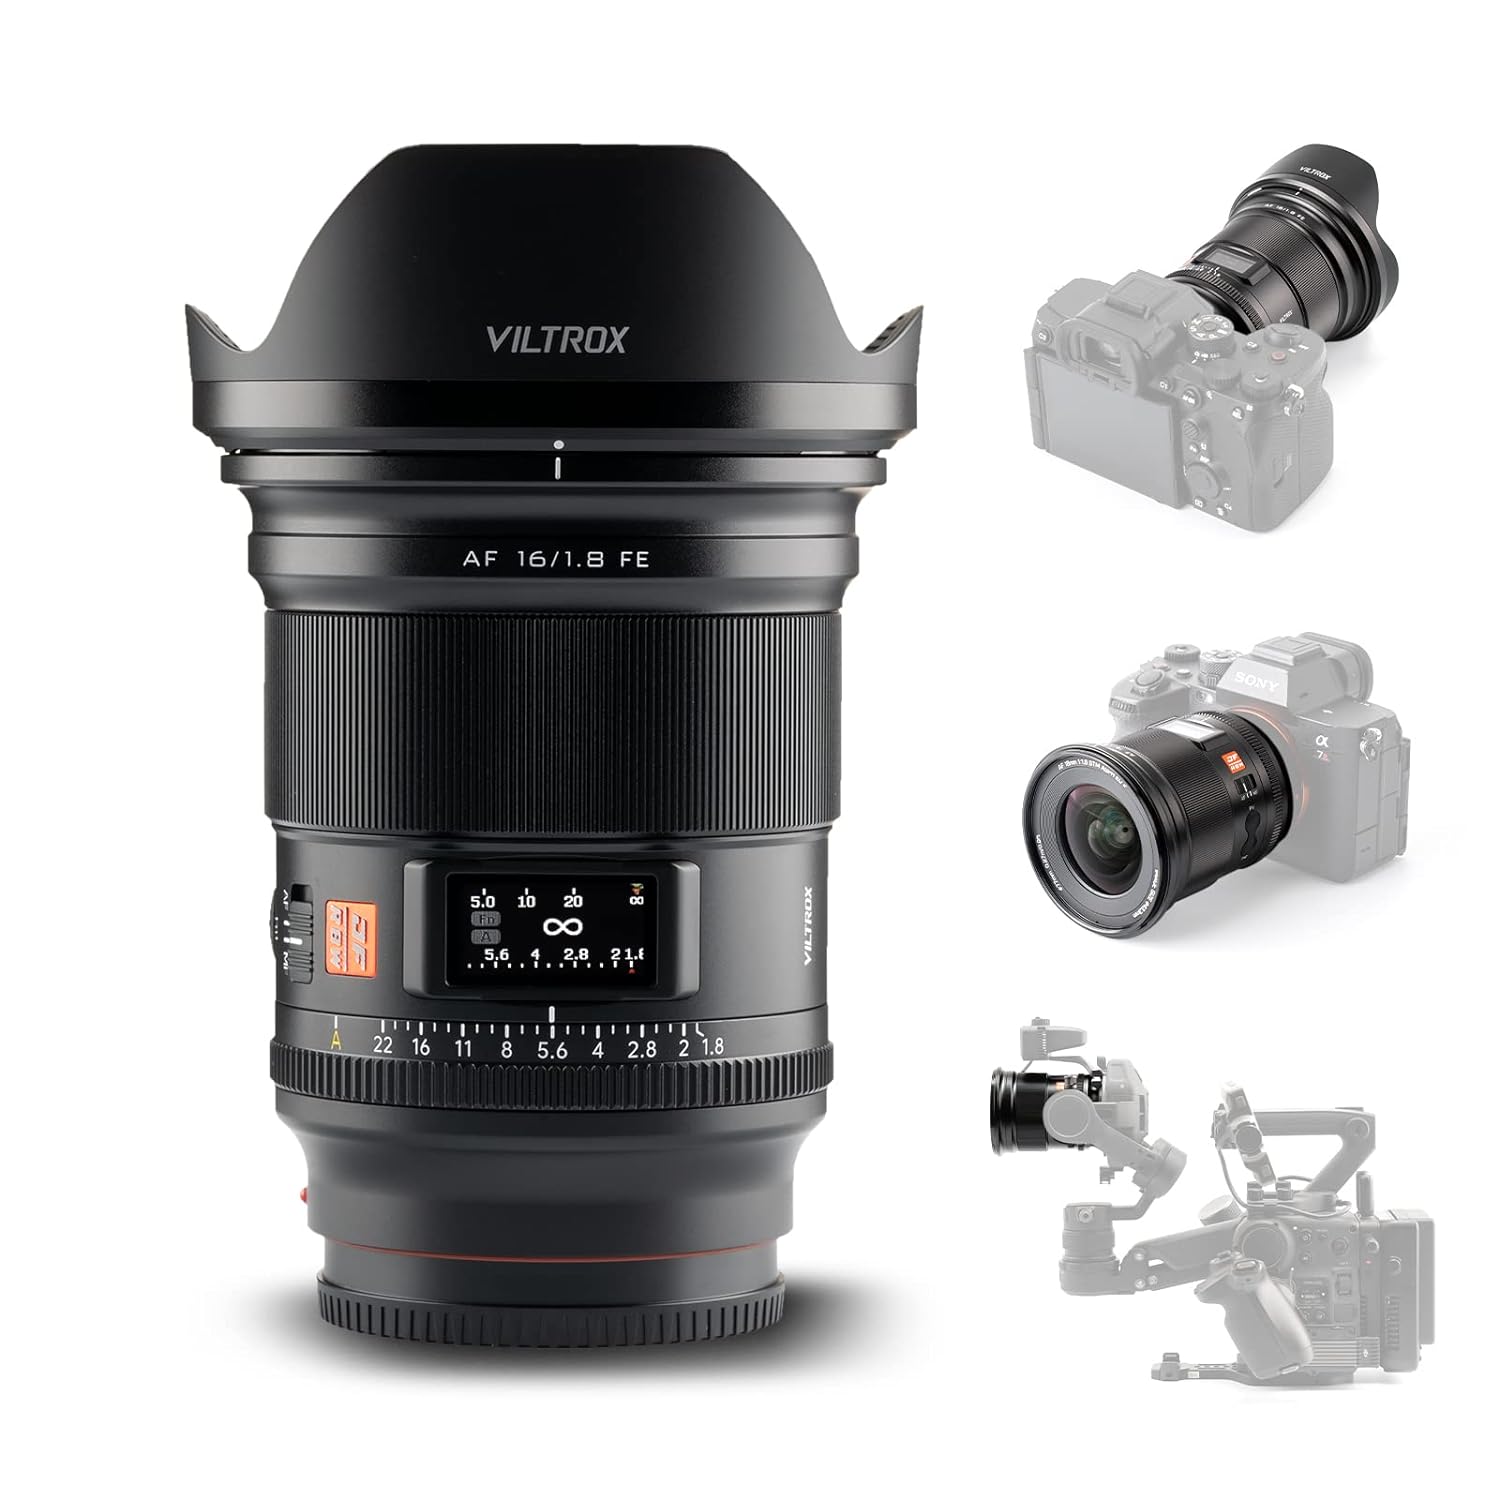  VILTROX 16mm f/1.8 F1.8 FE Auto Focus Full Frame Large  Aperture Ultra Wide Angle Lens Built-in LCD Screen for Sony E-Mount Cameras  A7 A7II A7III A7R A7RII A7RIII A7RIV A7S